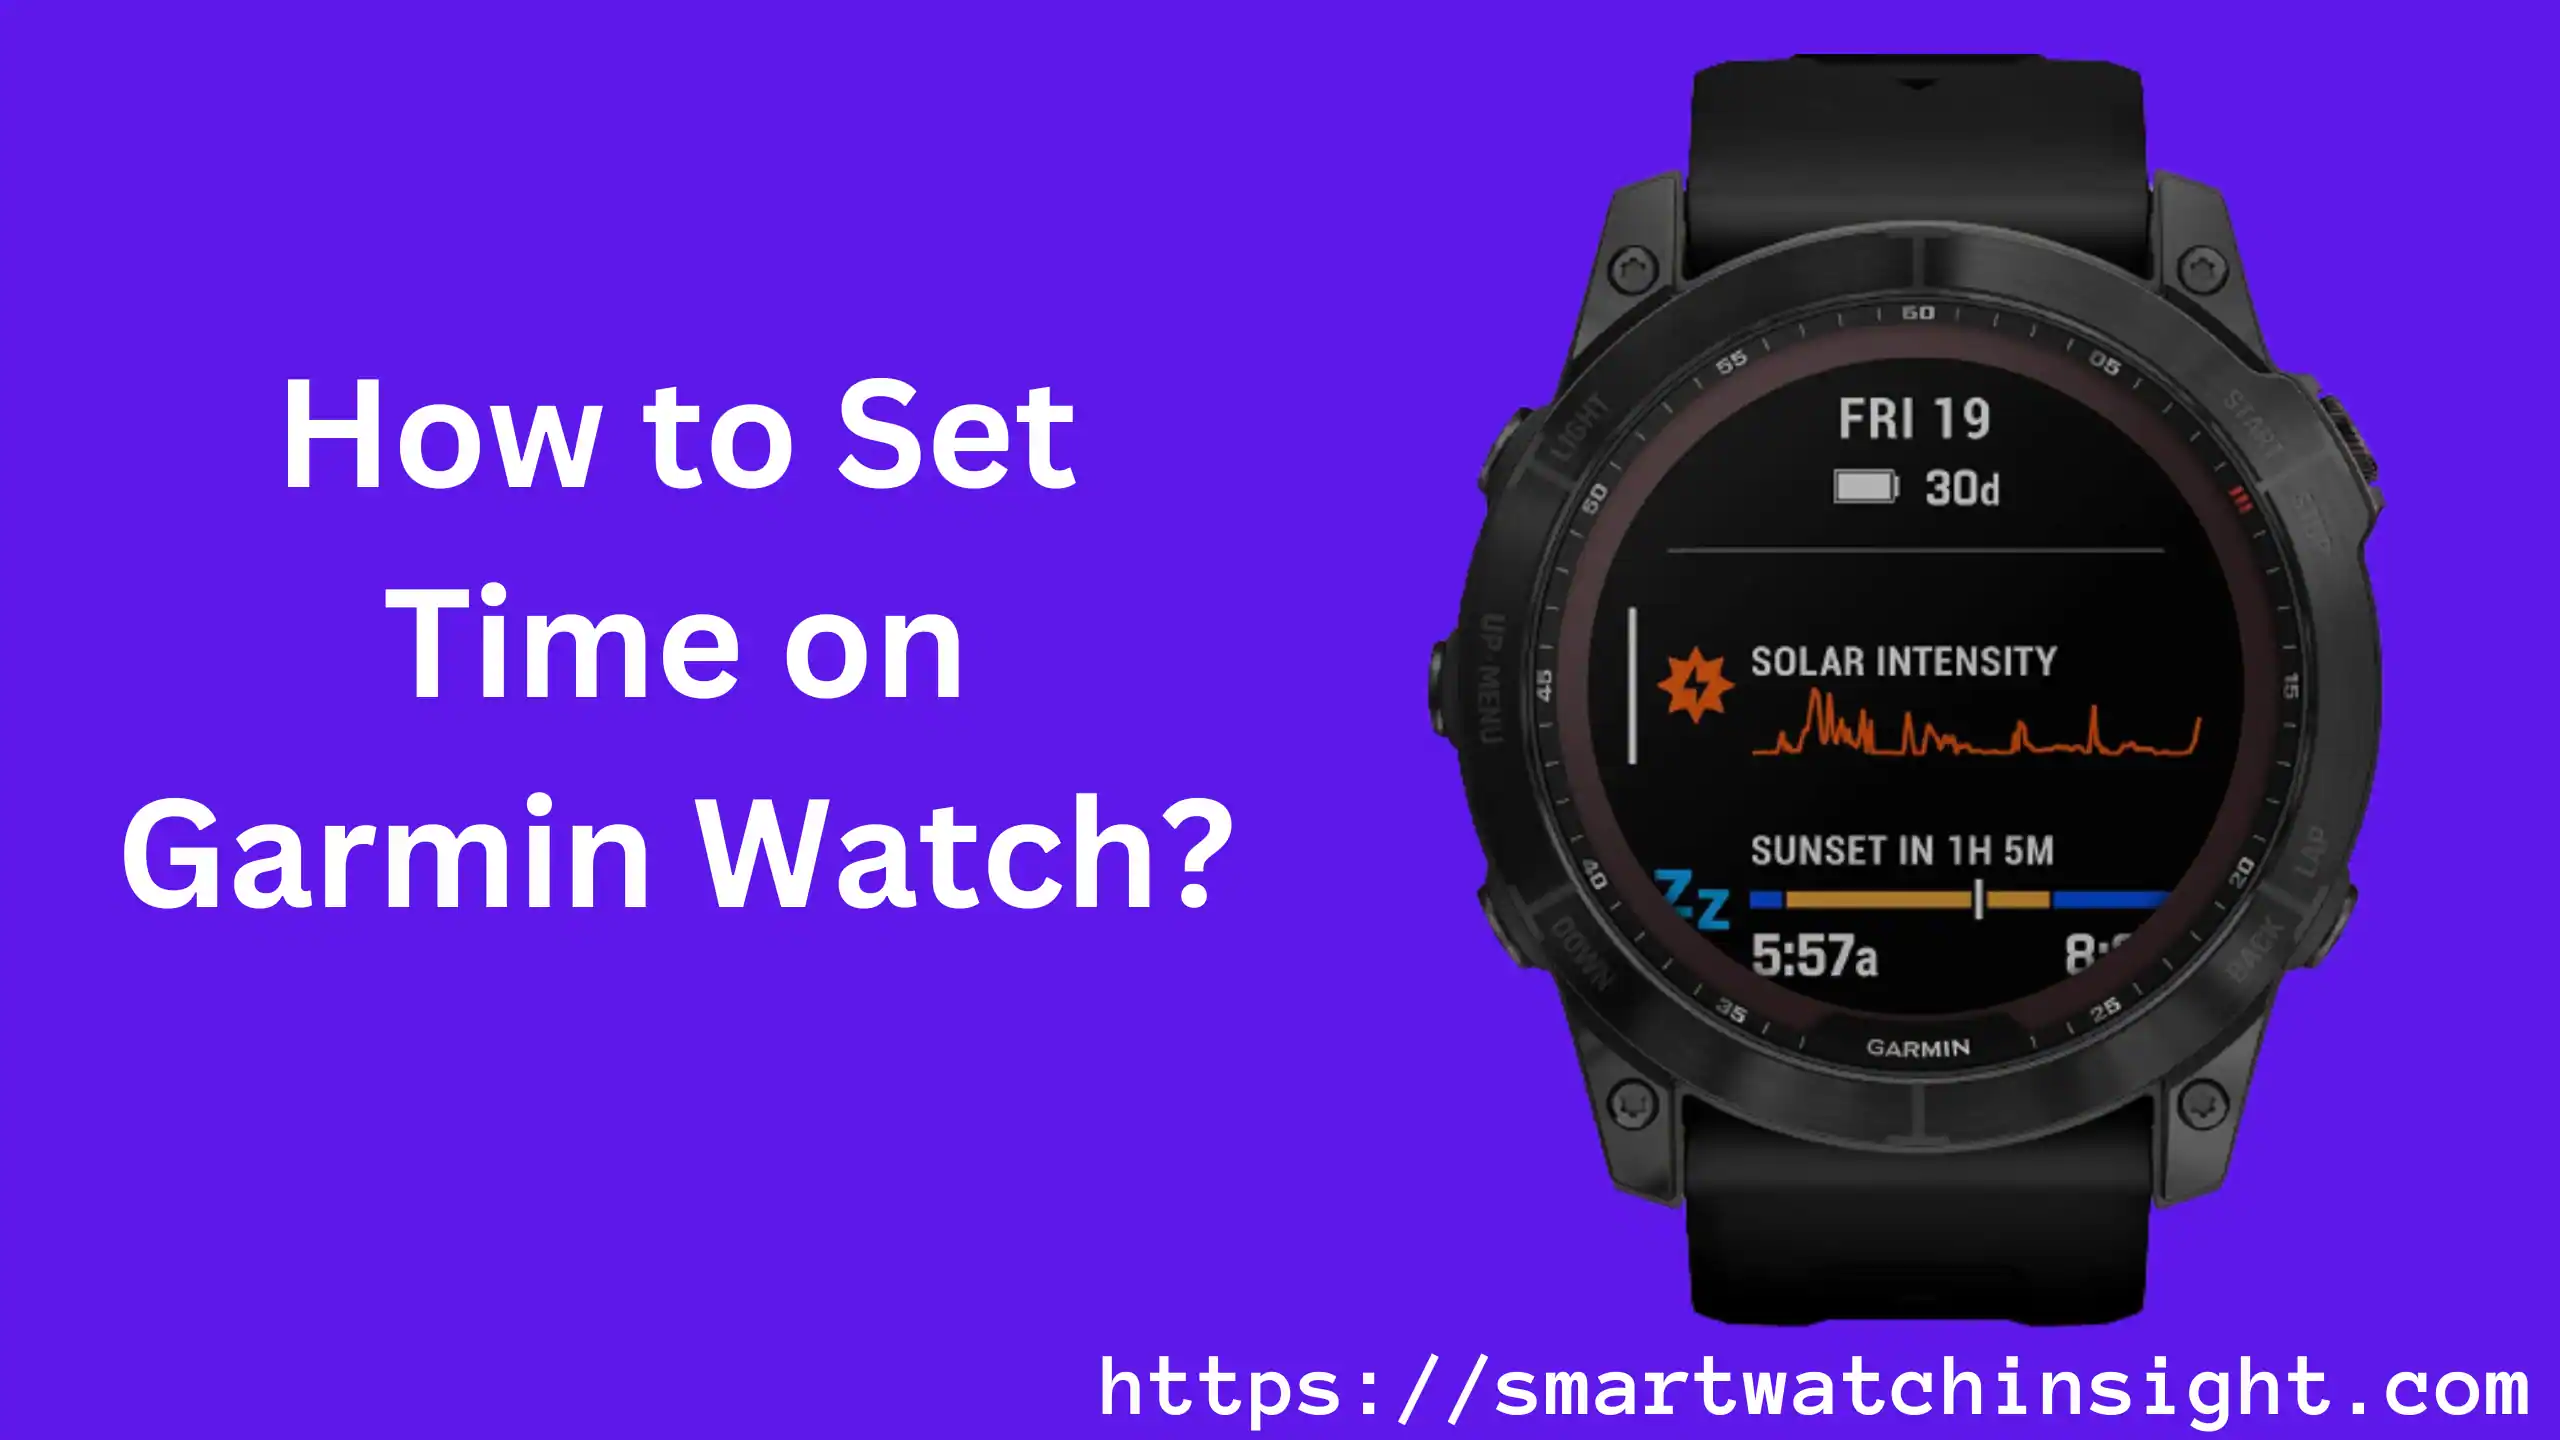 How to Set Time on Garmin Watch